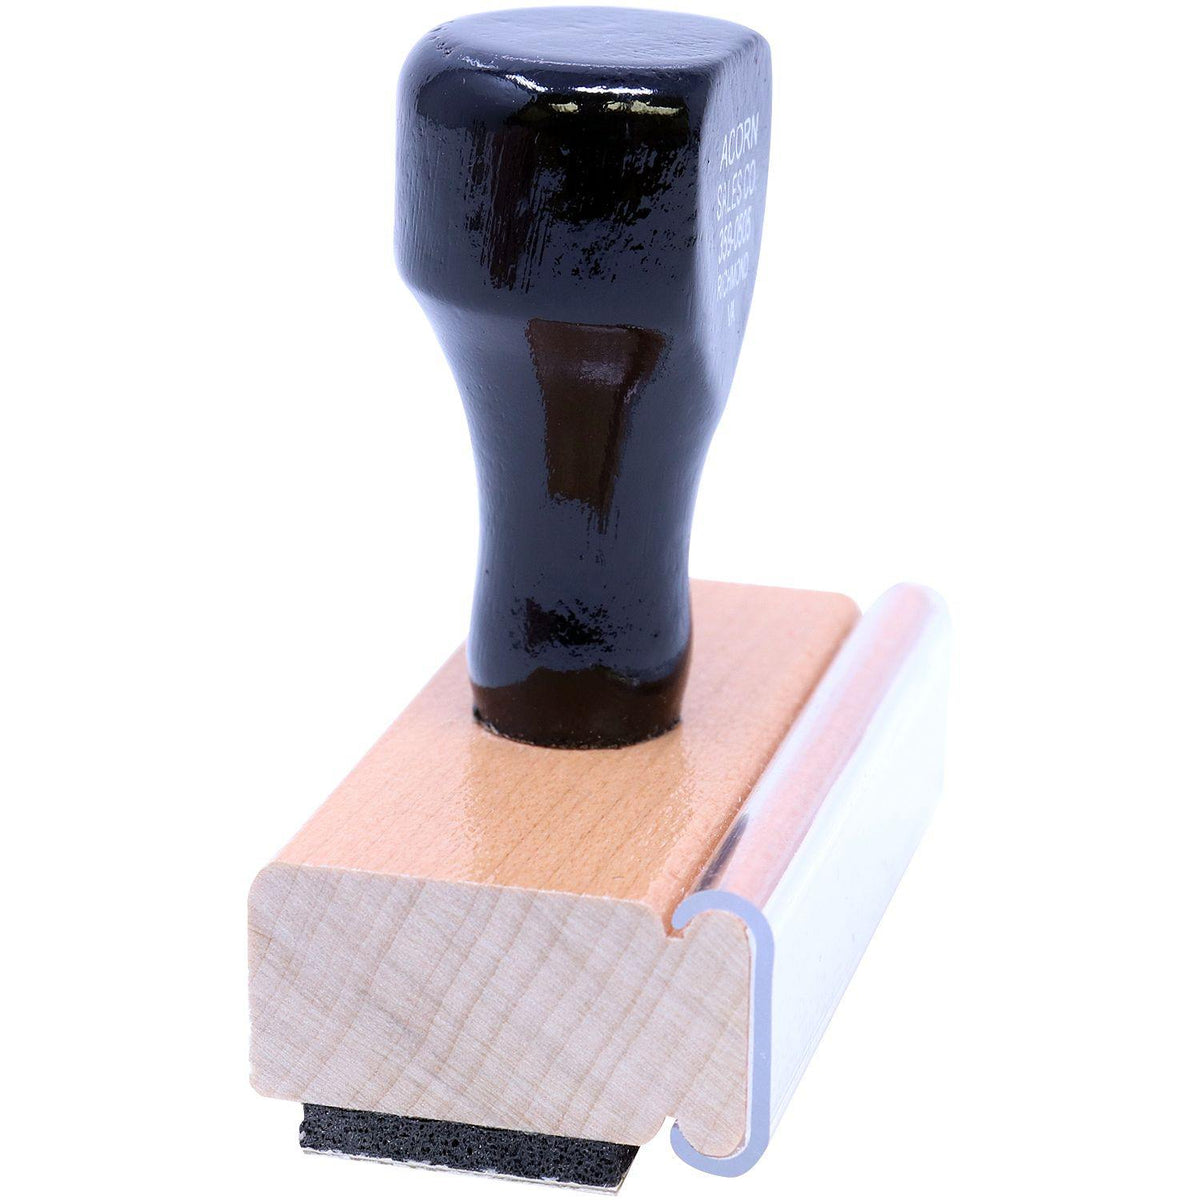 Side View of Im Proud Of You Rubber Stamp at an Angle